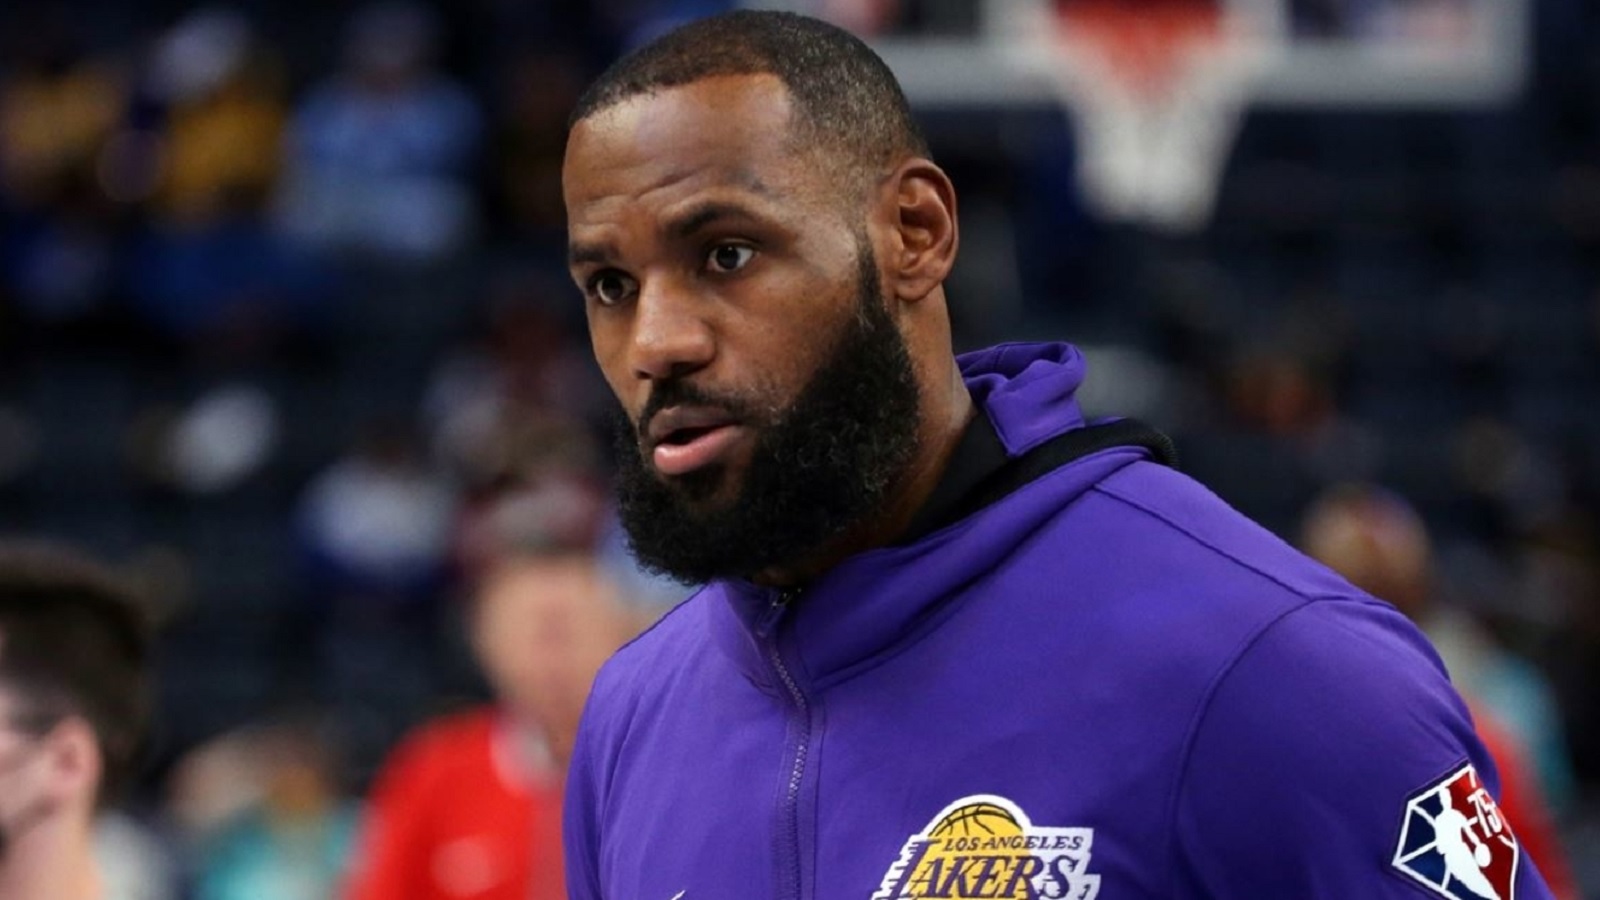 LeBron James Considering Retirement from Basketball: 'Got to Think About It